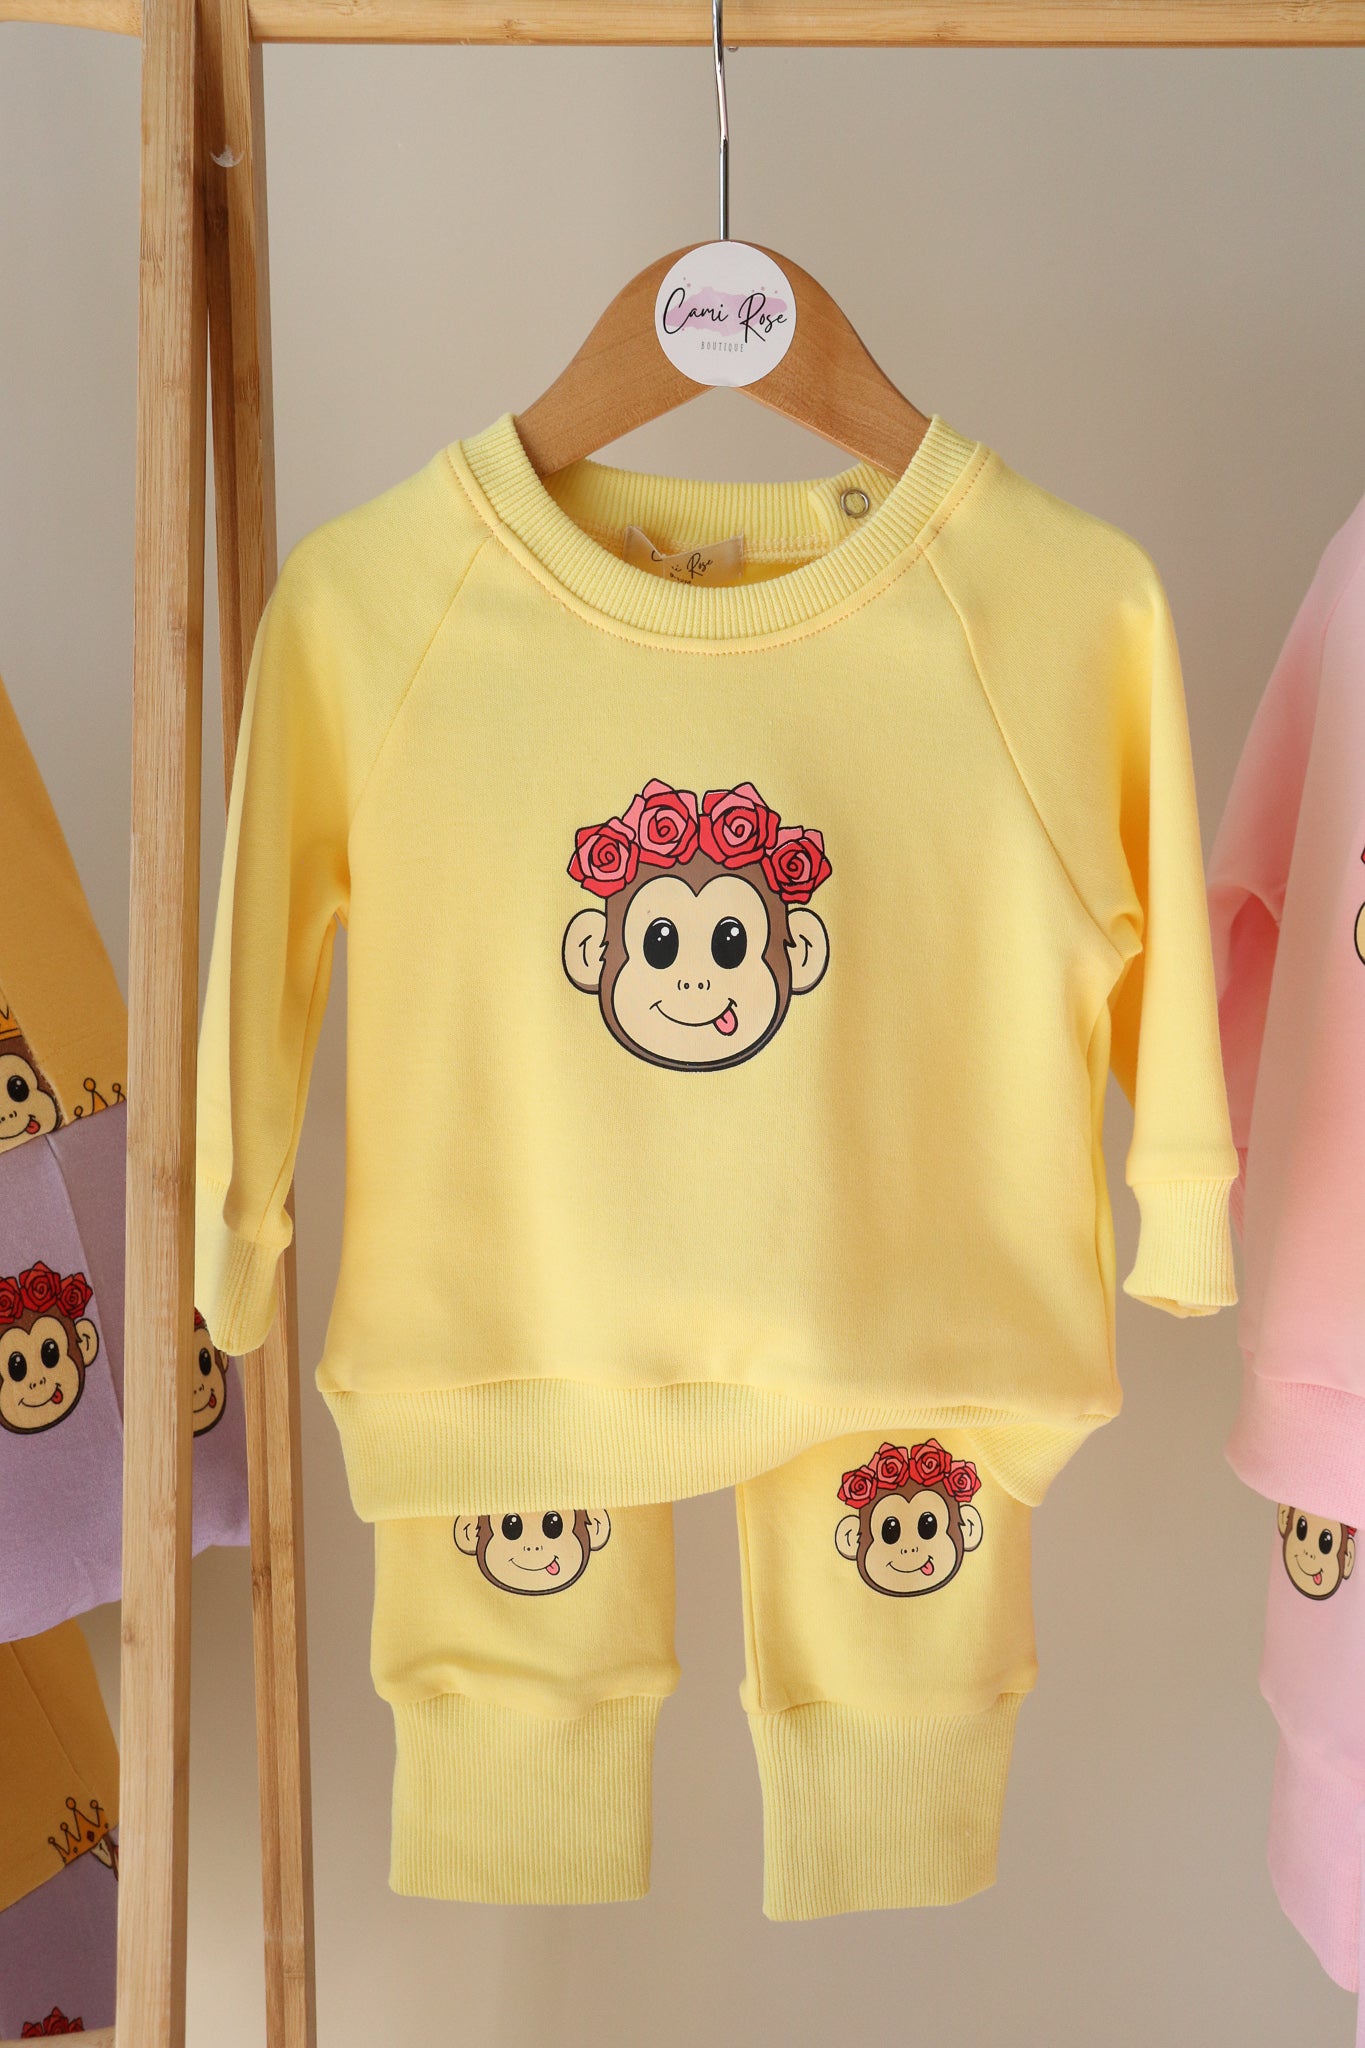 baby yellow lounge set with a cute monkey printed on the jumper and on the knees of the pants